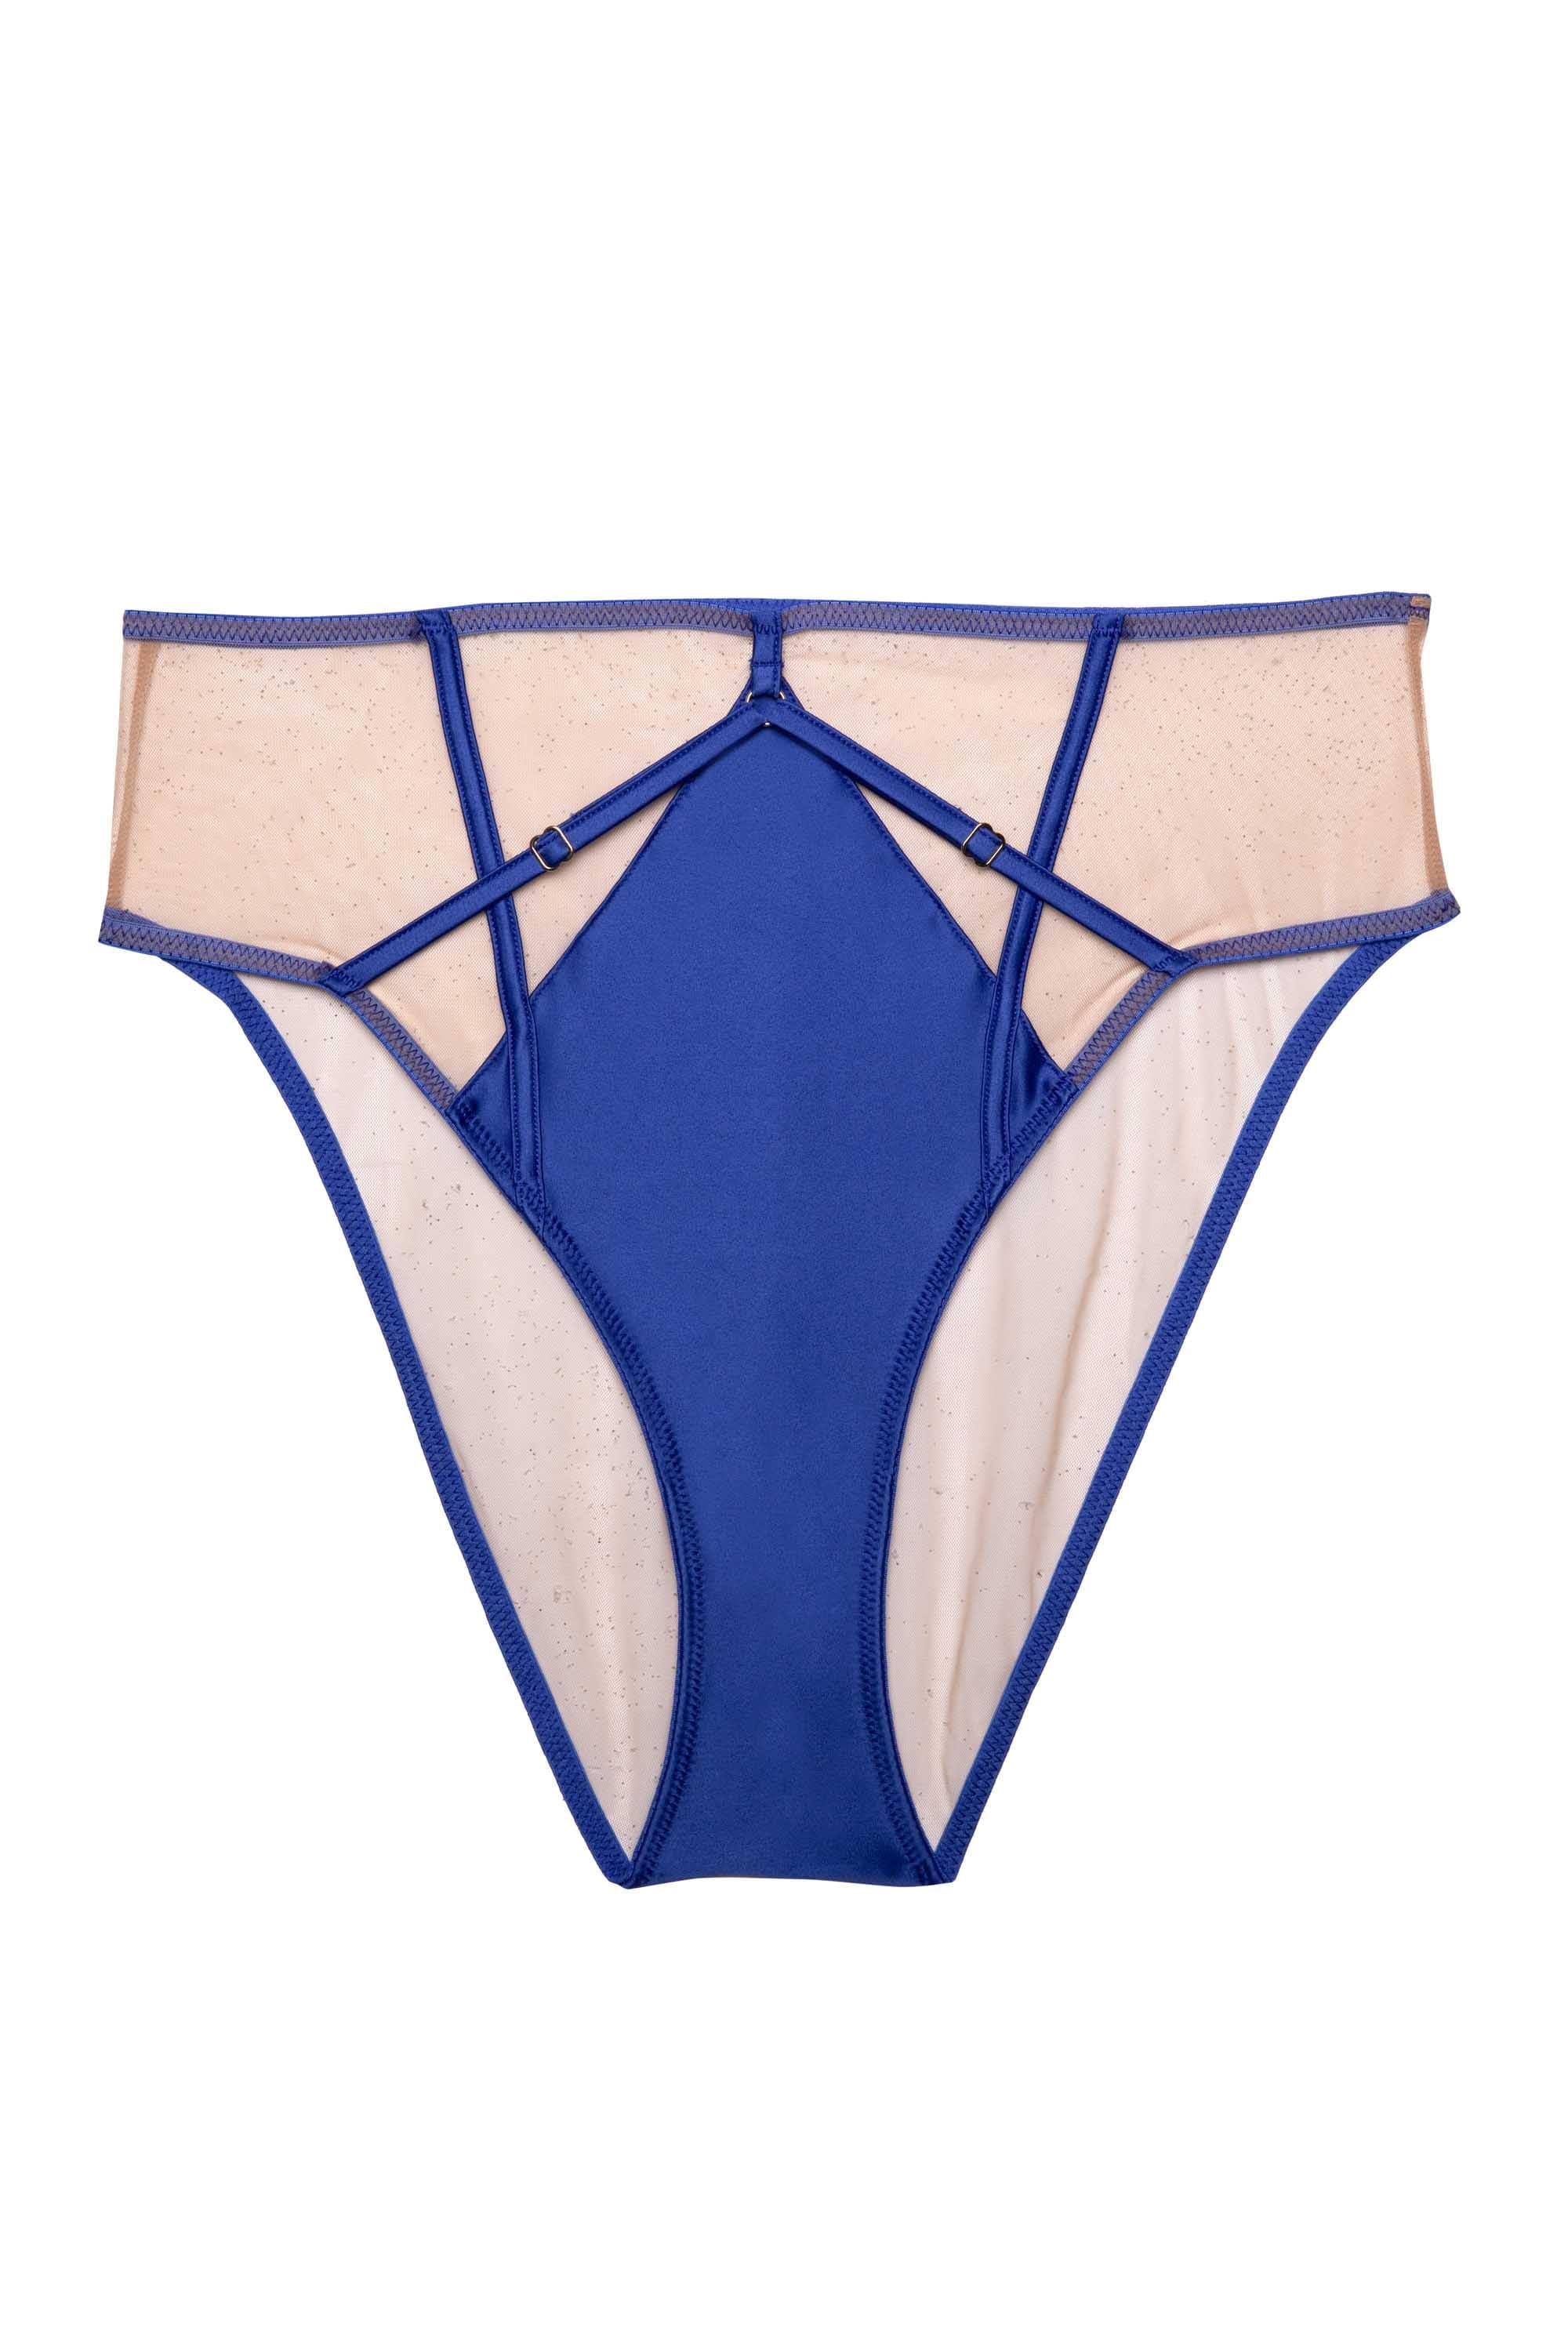 Cobalt blue high waist brief with mesh panels and straps